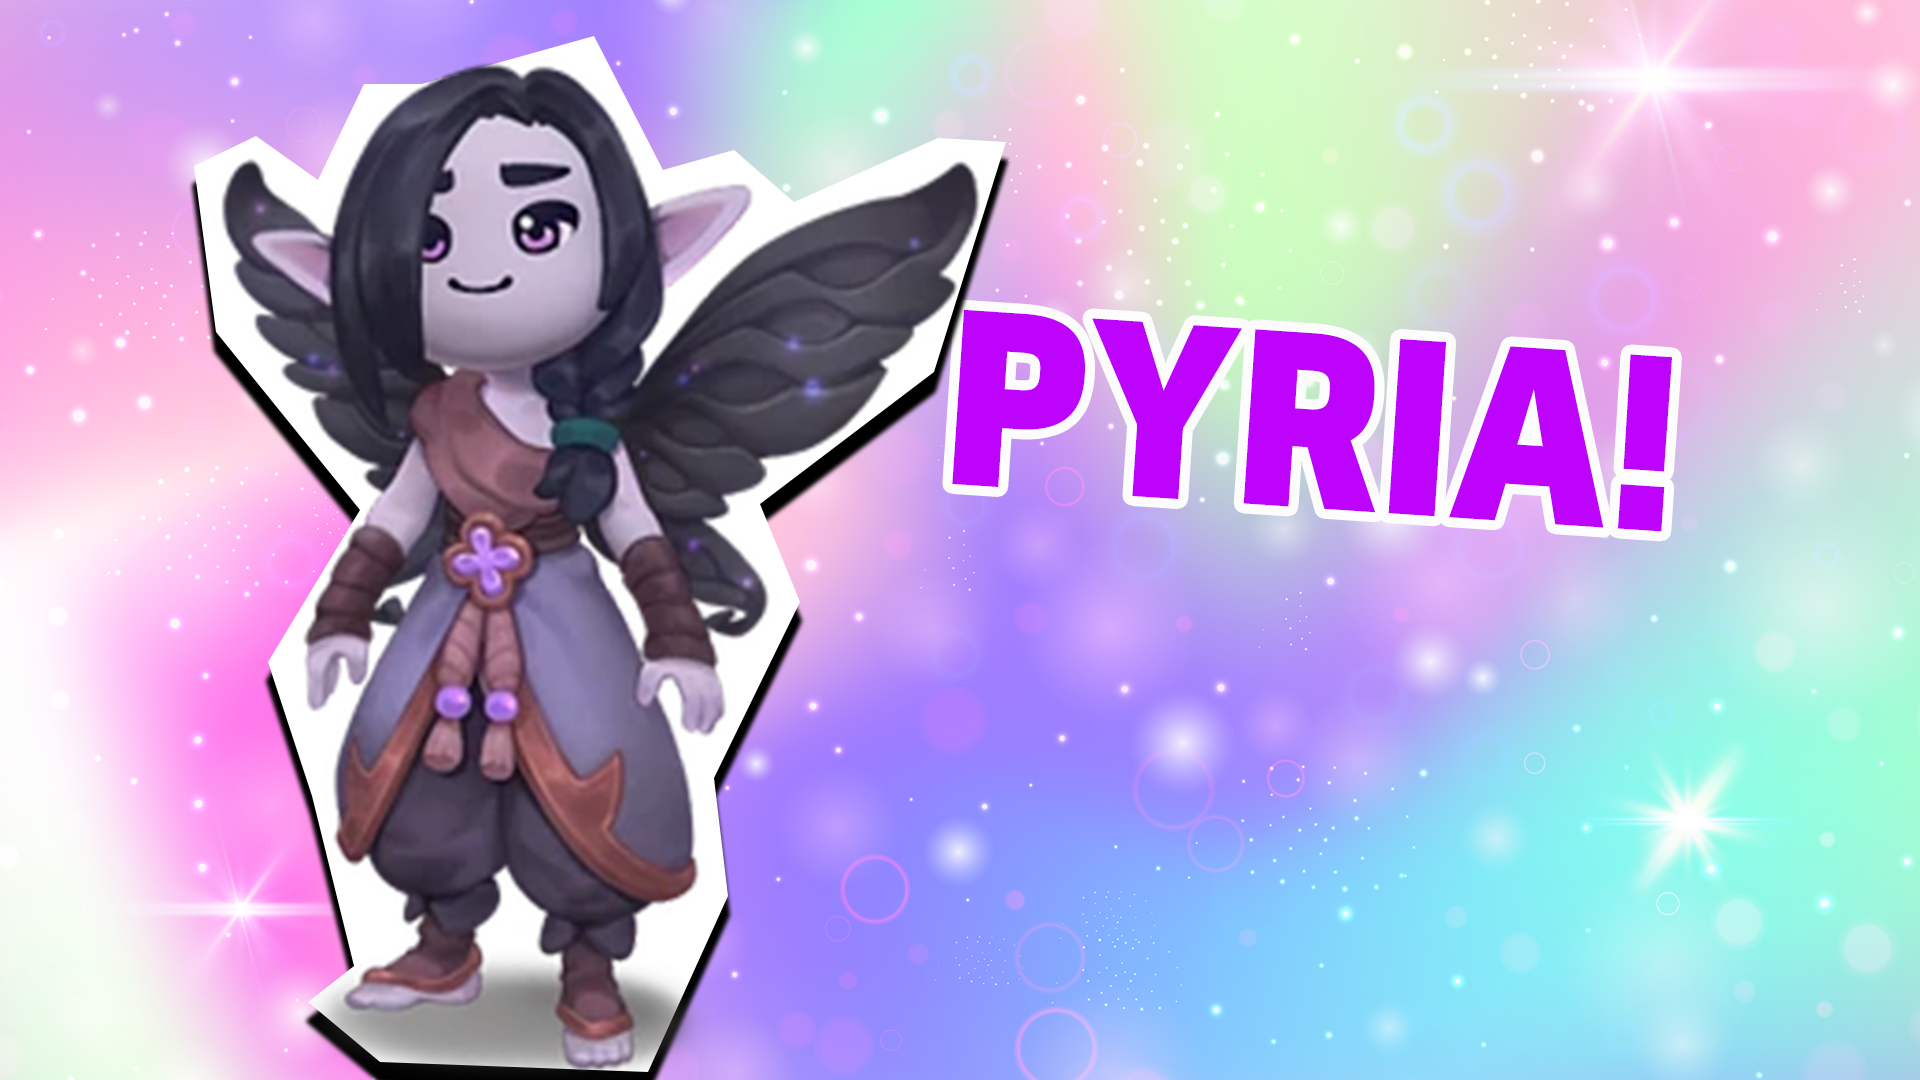 You're Pyria! You're a bit shyer than your friends, but you have a passion for plants and horticulture that you love to talk about!